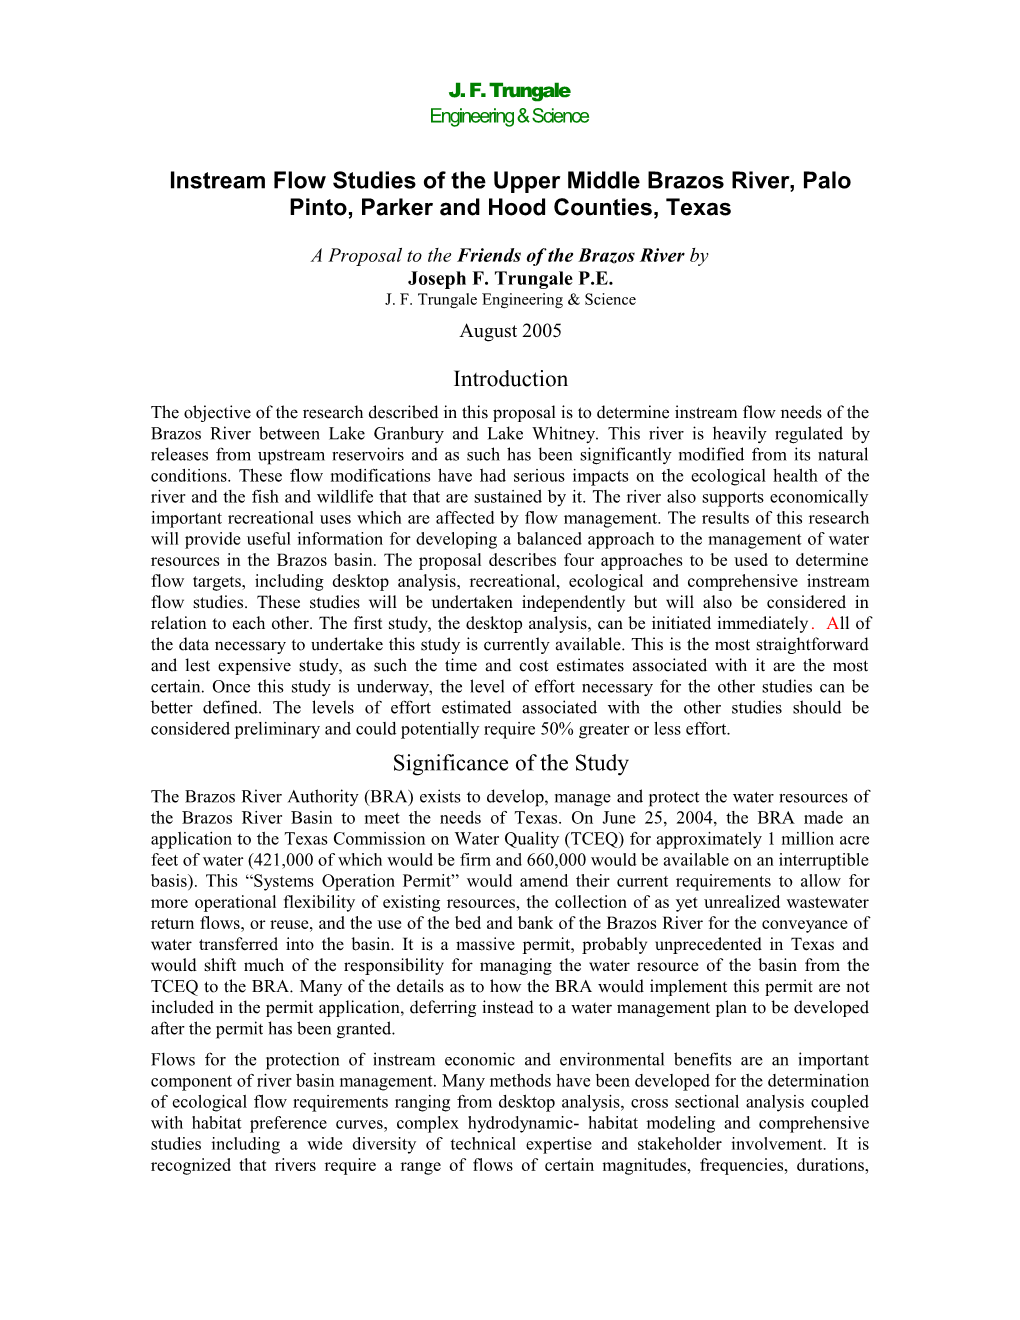 Instream Flow Studies of the Upper Middle Brazos River, Palo Pinto, Parker and Hood Counties